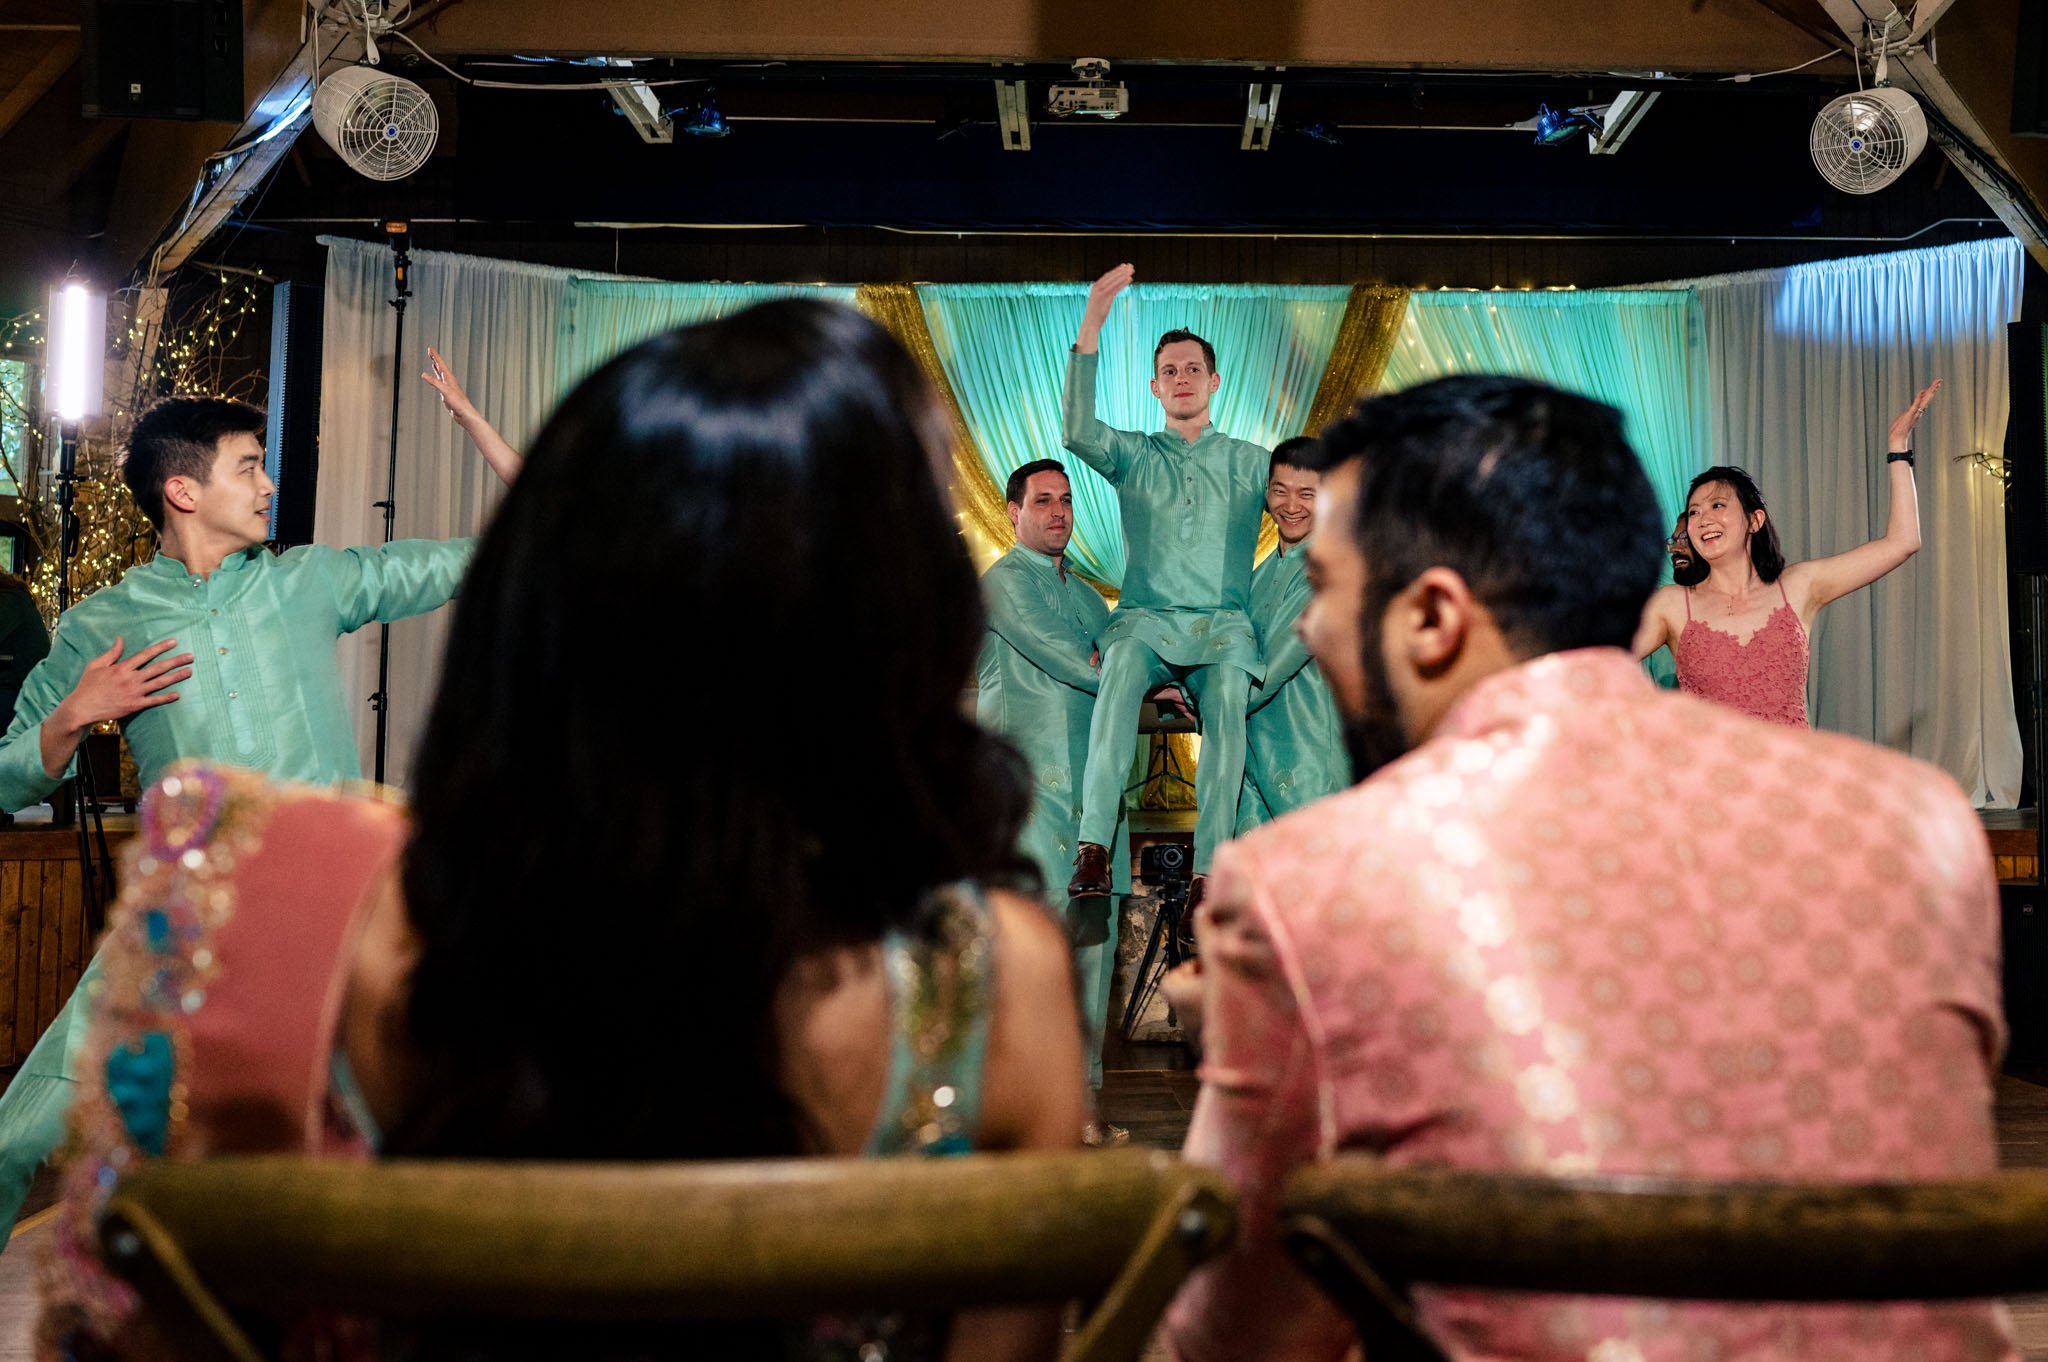 A group of people performing a dance at an Indian wedding held at the Biltmore Estate.